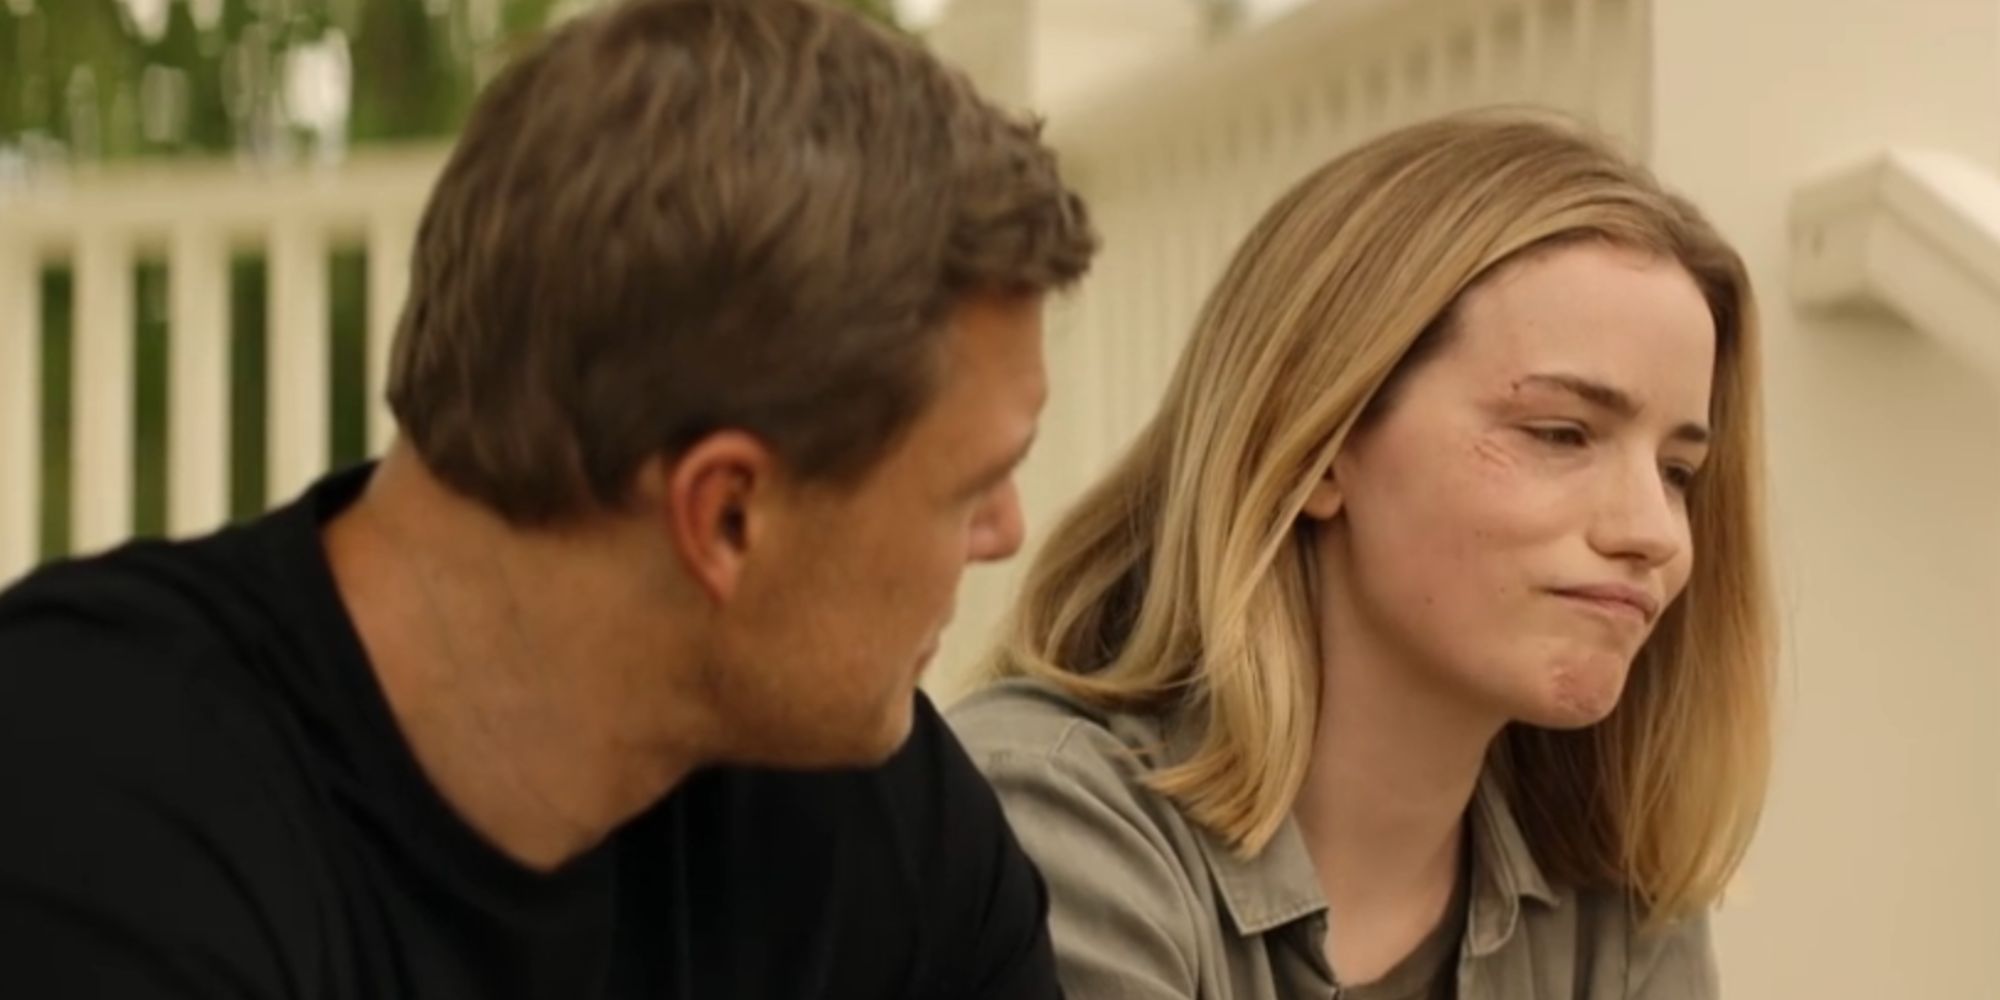 Ben Ritchson as Reacher looking at a pondering Willa Fitzgerald as Roscoe Conklin in Reacher